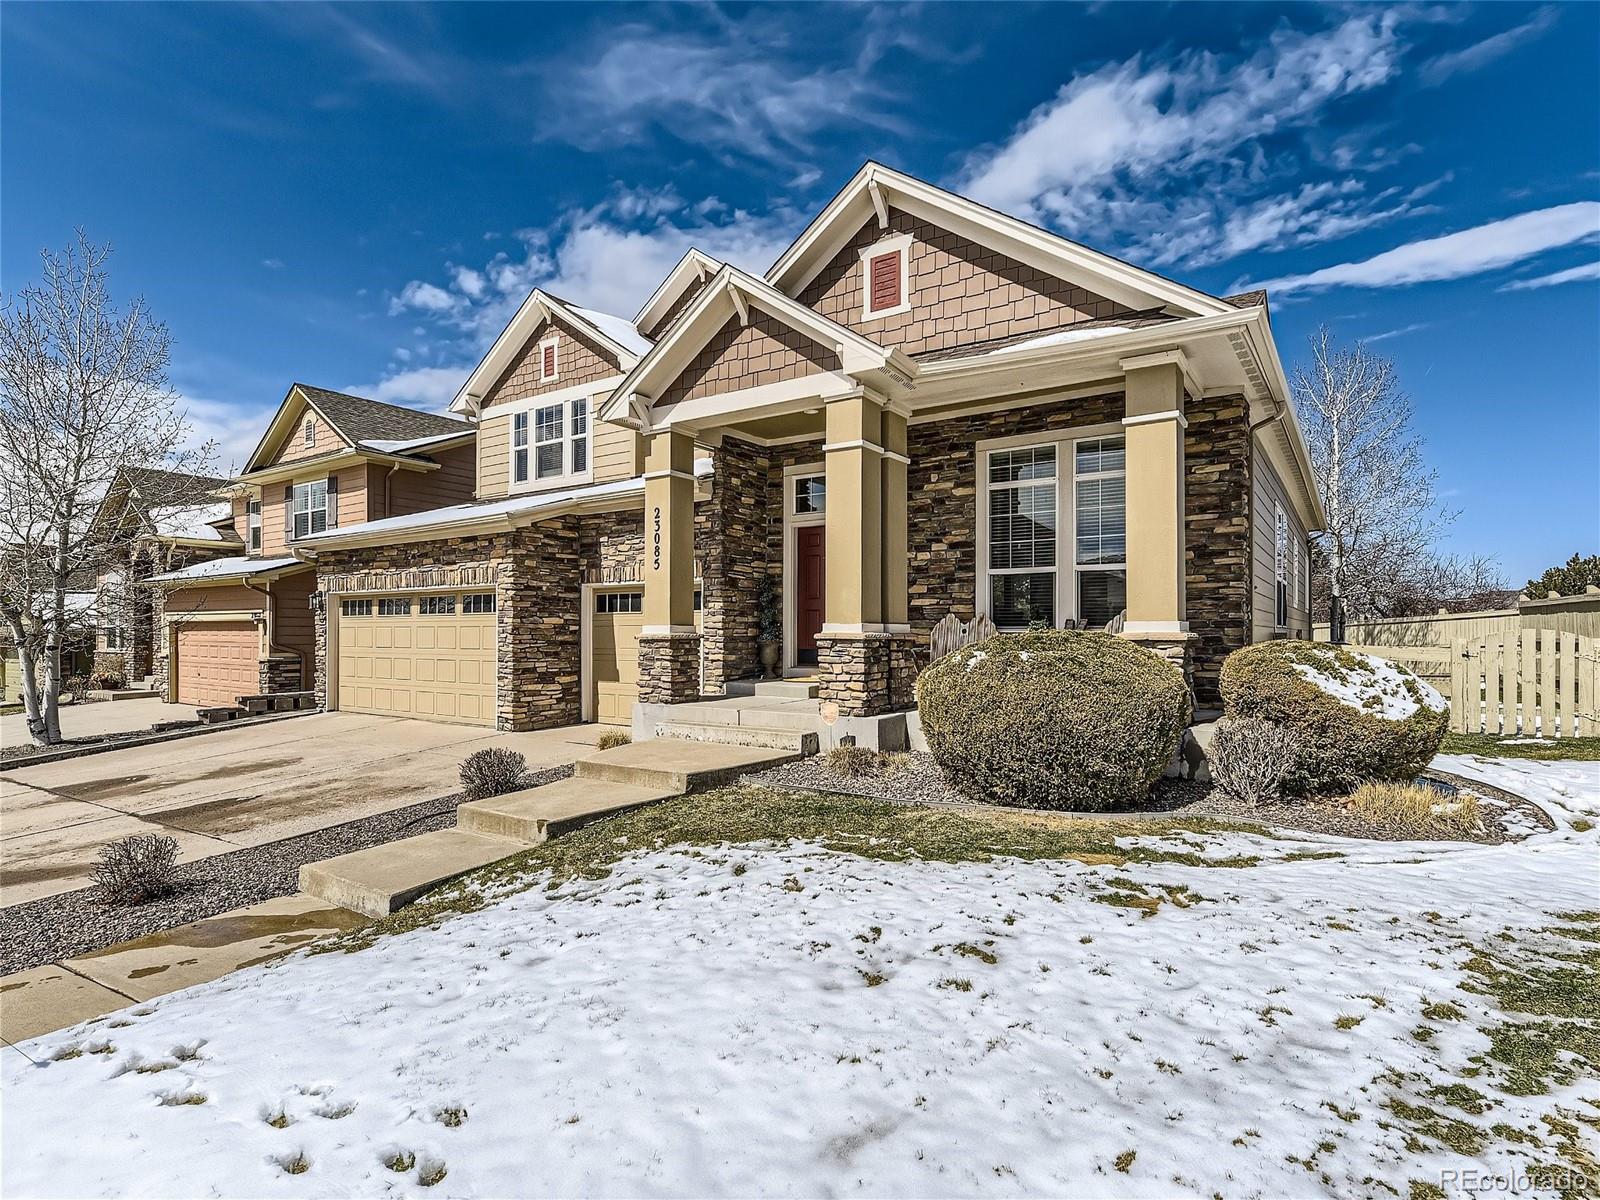 Report Image for 23085  Cleveland Drive,Parker, Colorado